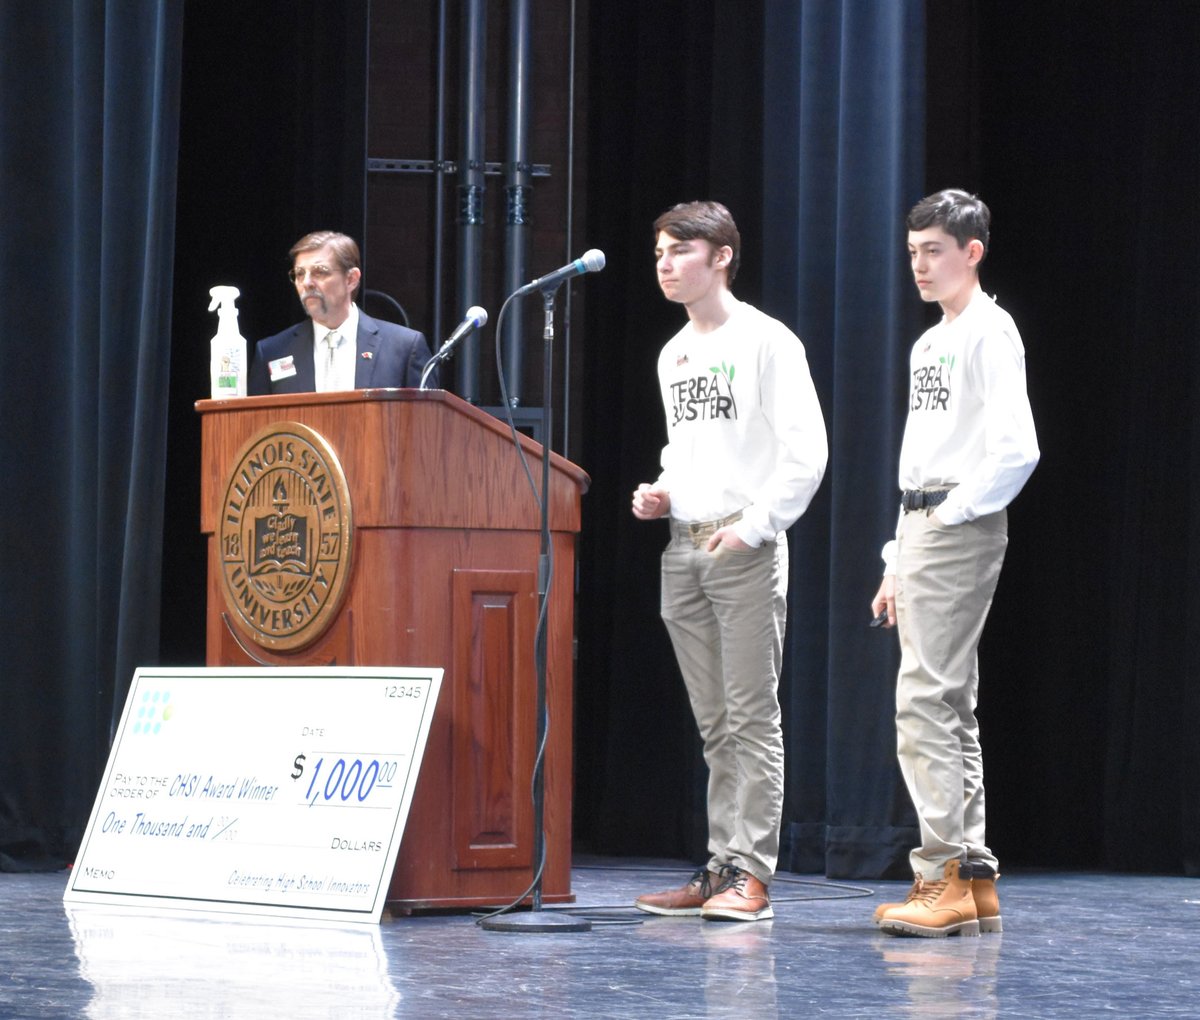 The IMA is invest in @chsinnovators' “Shark Tank” type program celebrating H.S. students from 40 IL schools who are creating/presenting new products for an opportunity to win scholarships. IMA team members served as judges during the Innovation Showcase! ow.ly/wIC750yBWYW